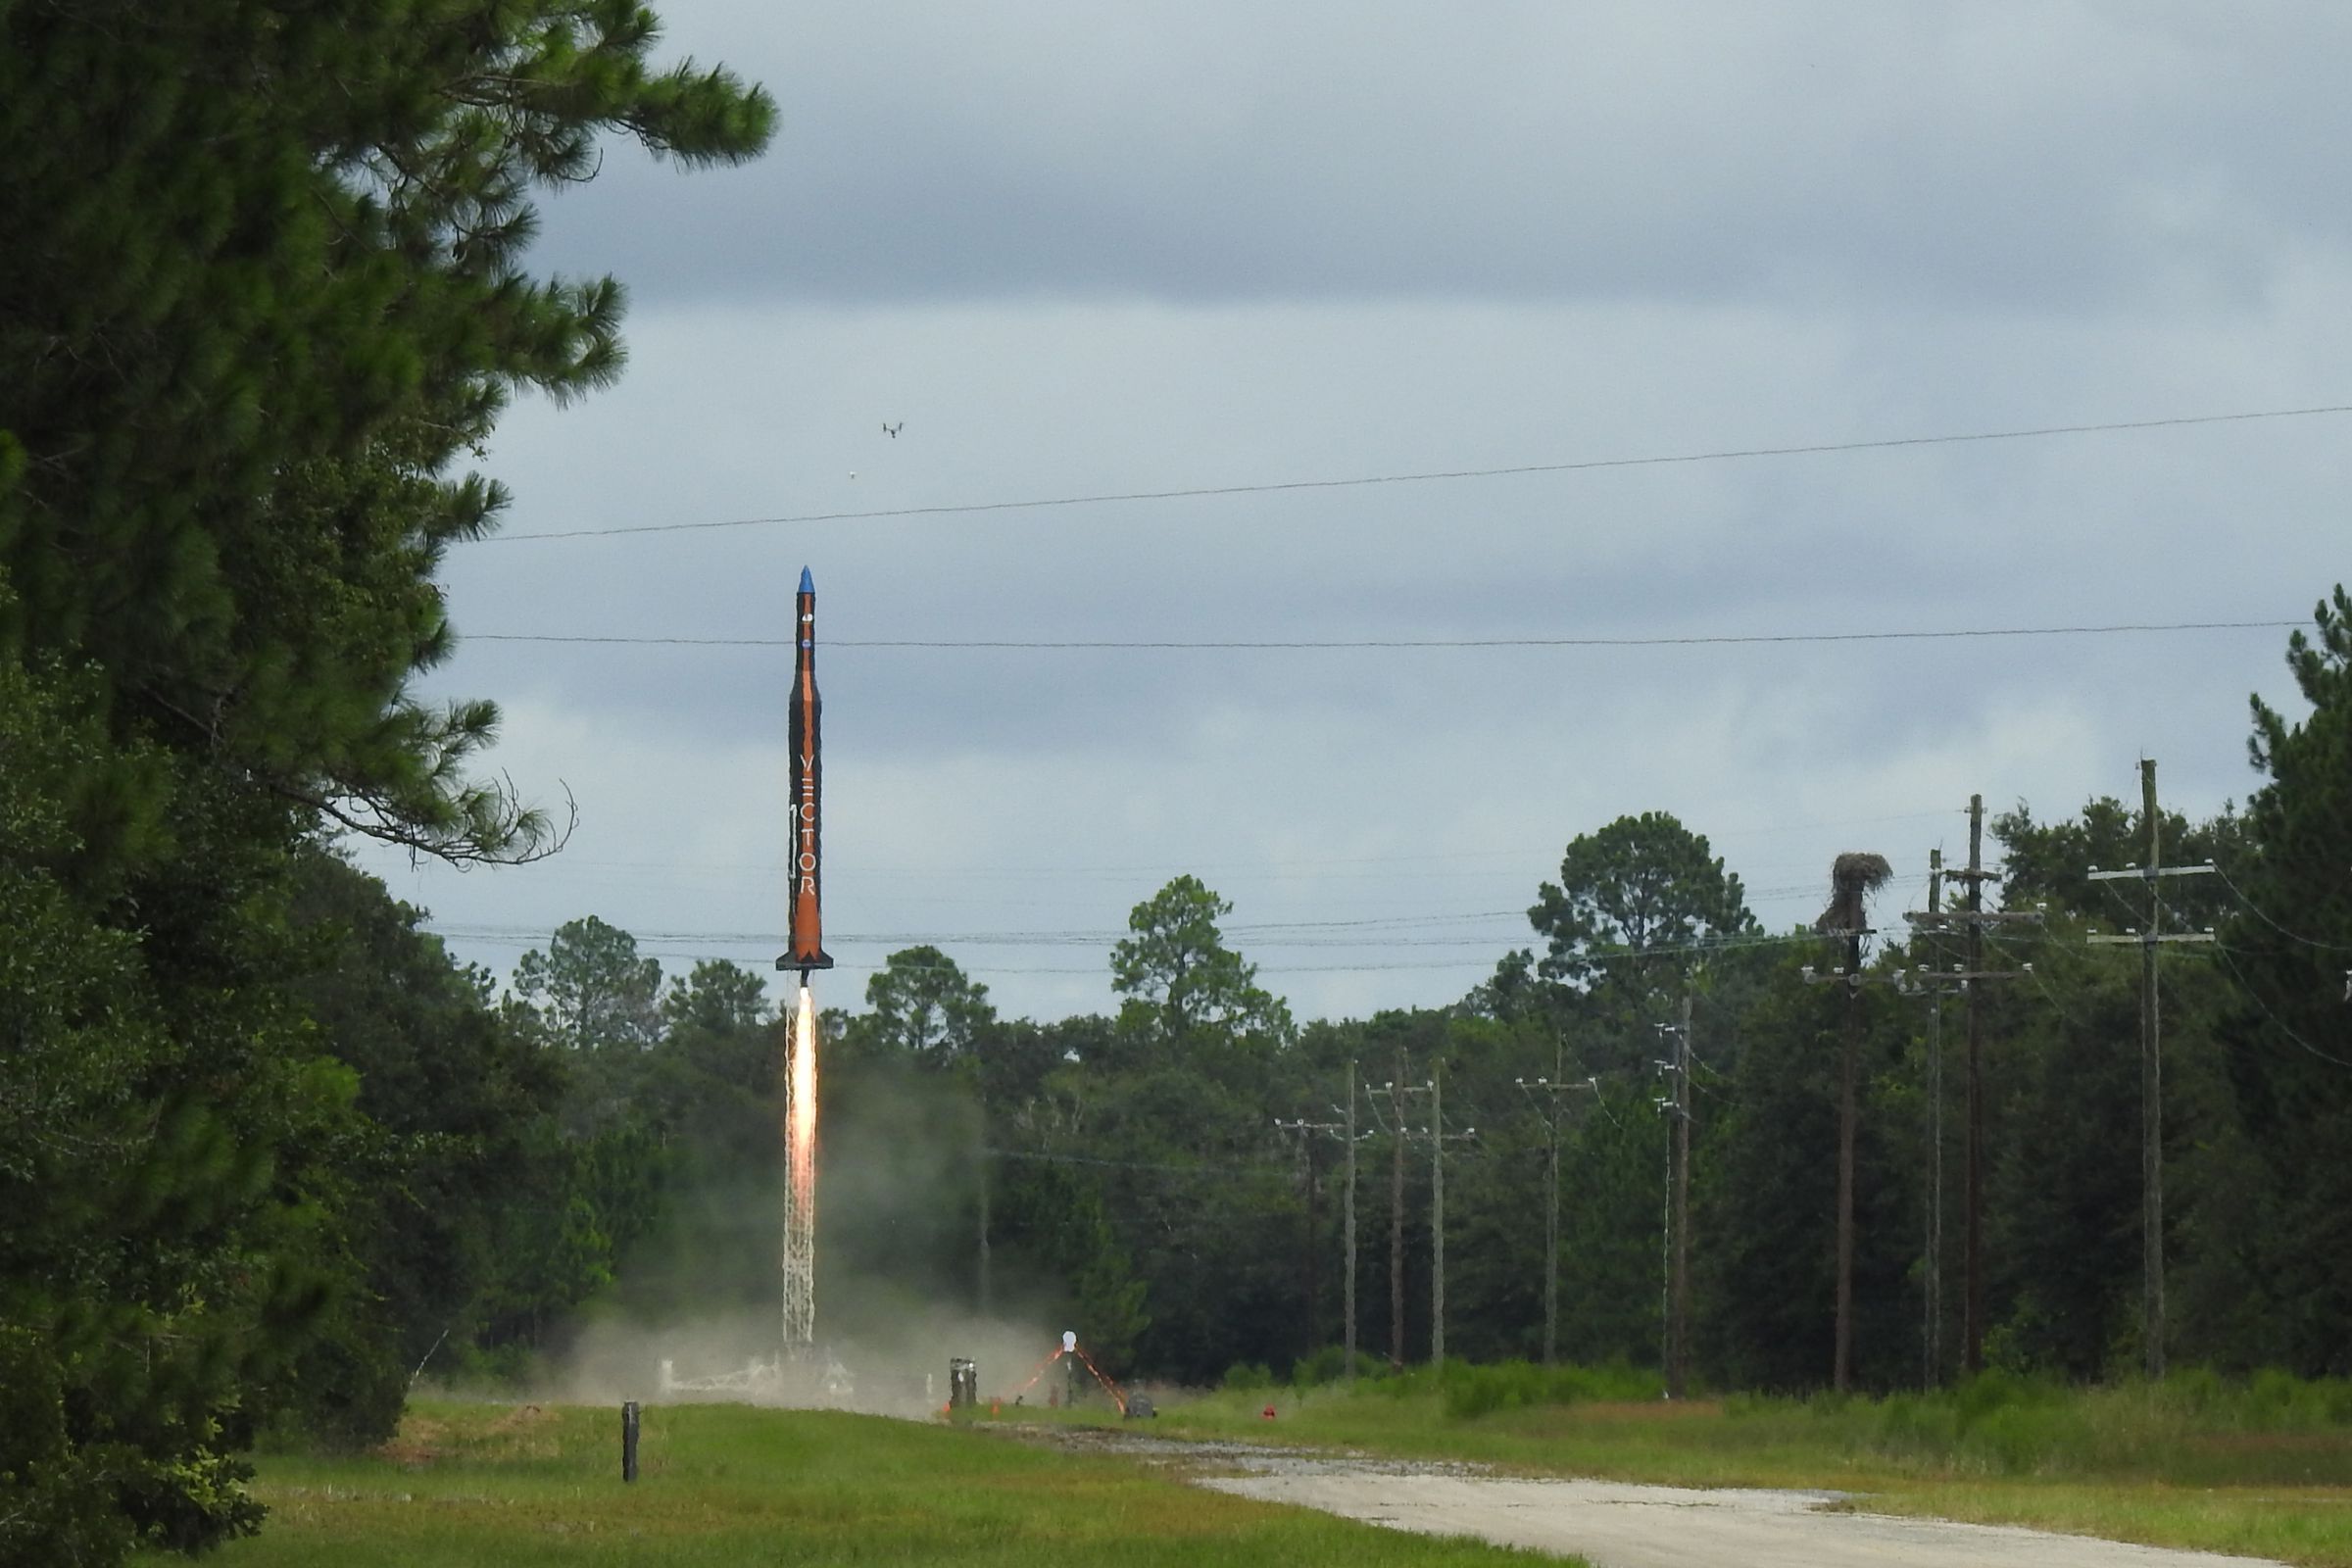 The Vector-R taking off on its second suborbital test flight in 2017